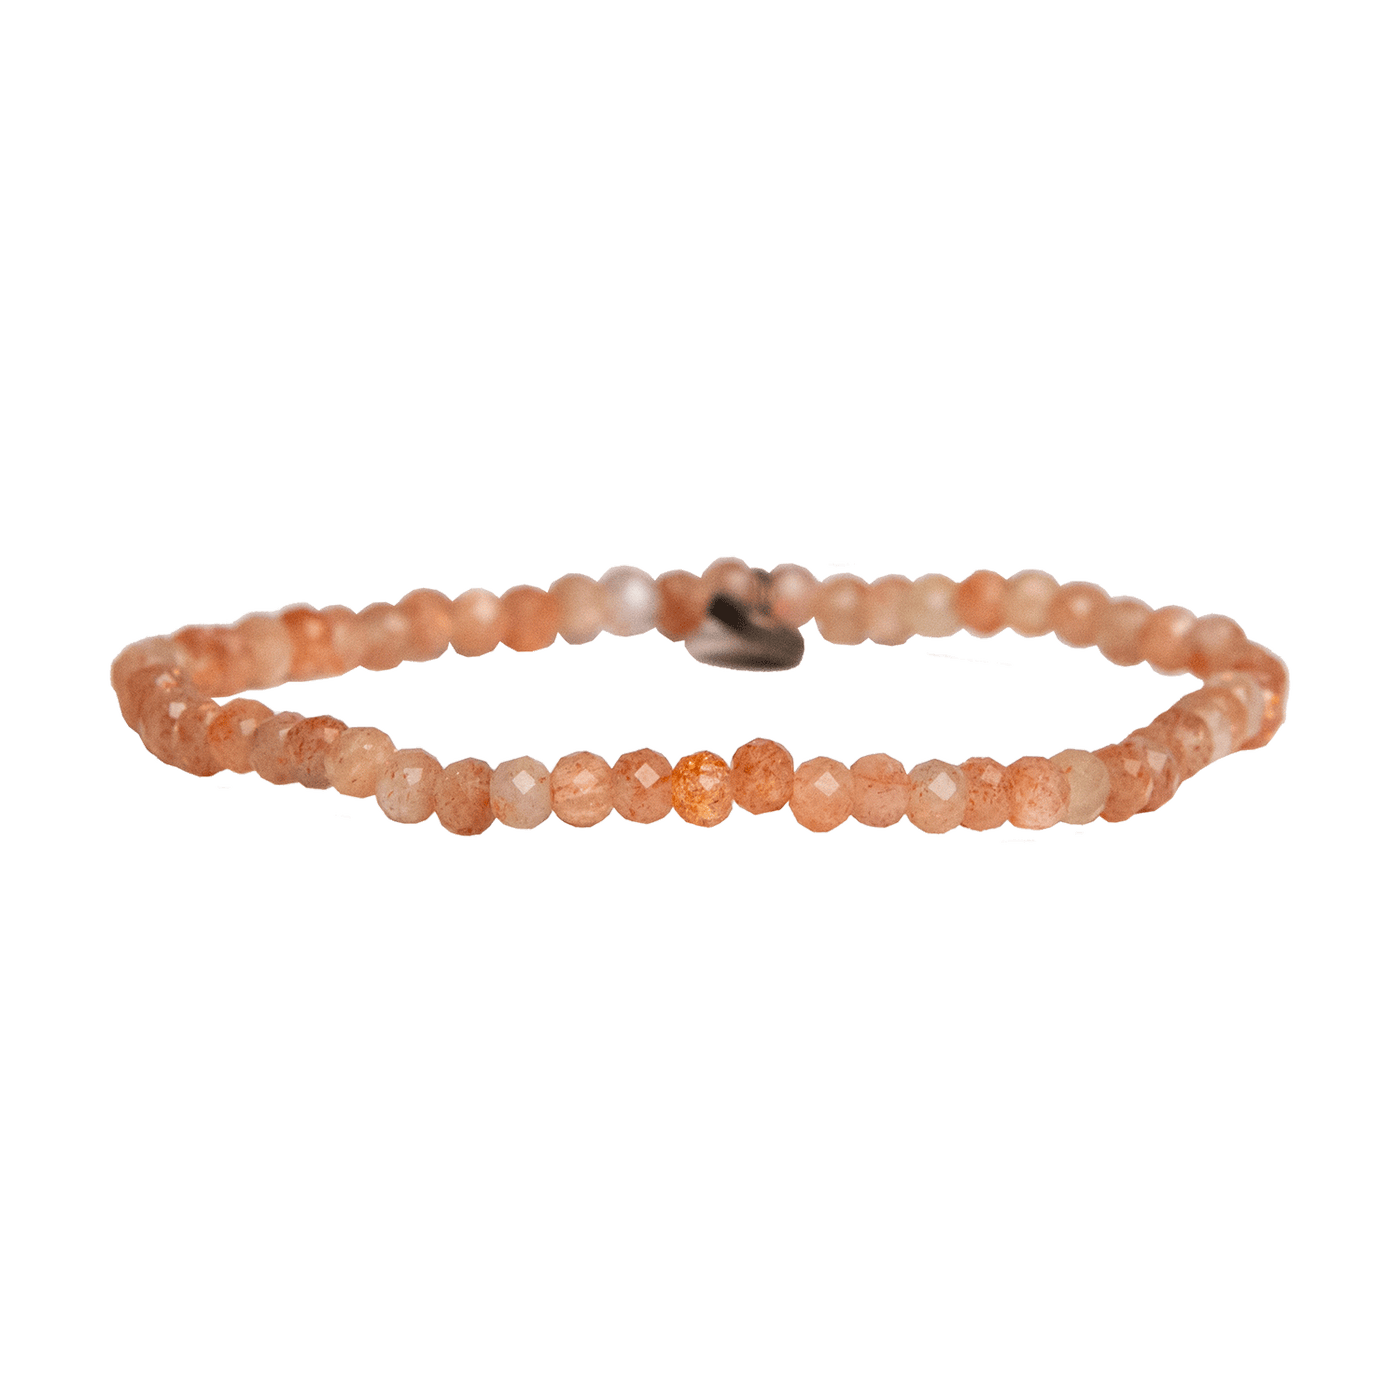 product view of genuine Golden Sunstone mini gemstone dainty stretch bracelet by Energy Muse